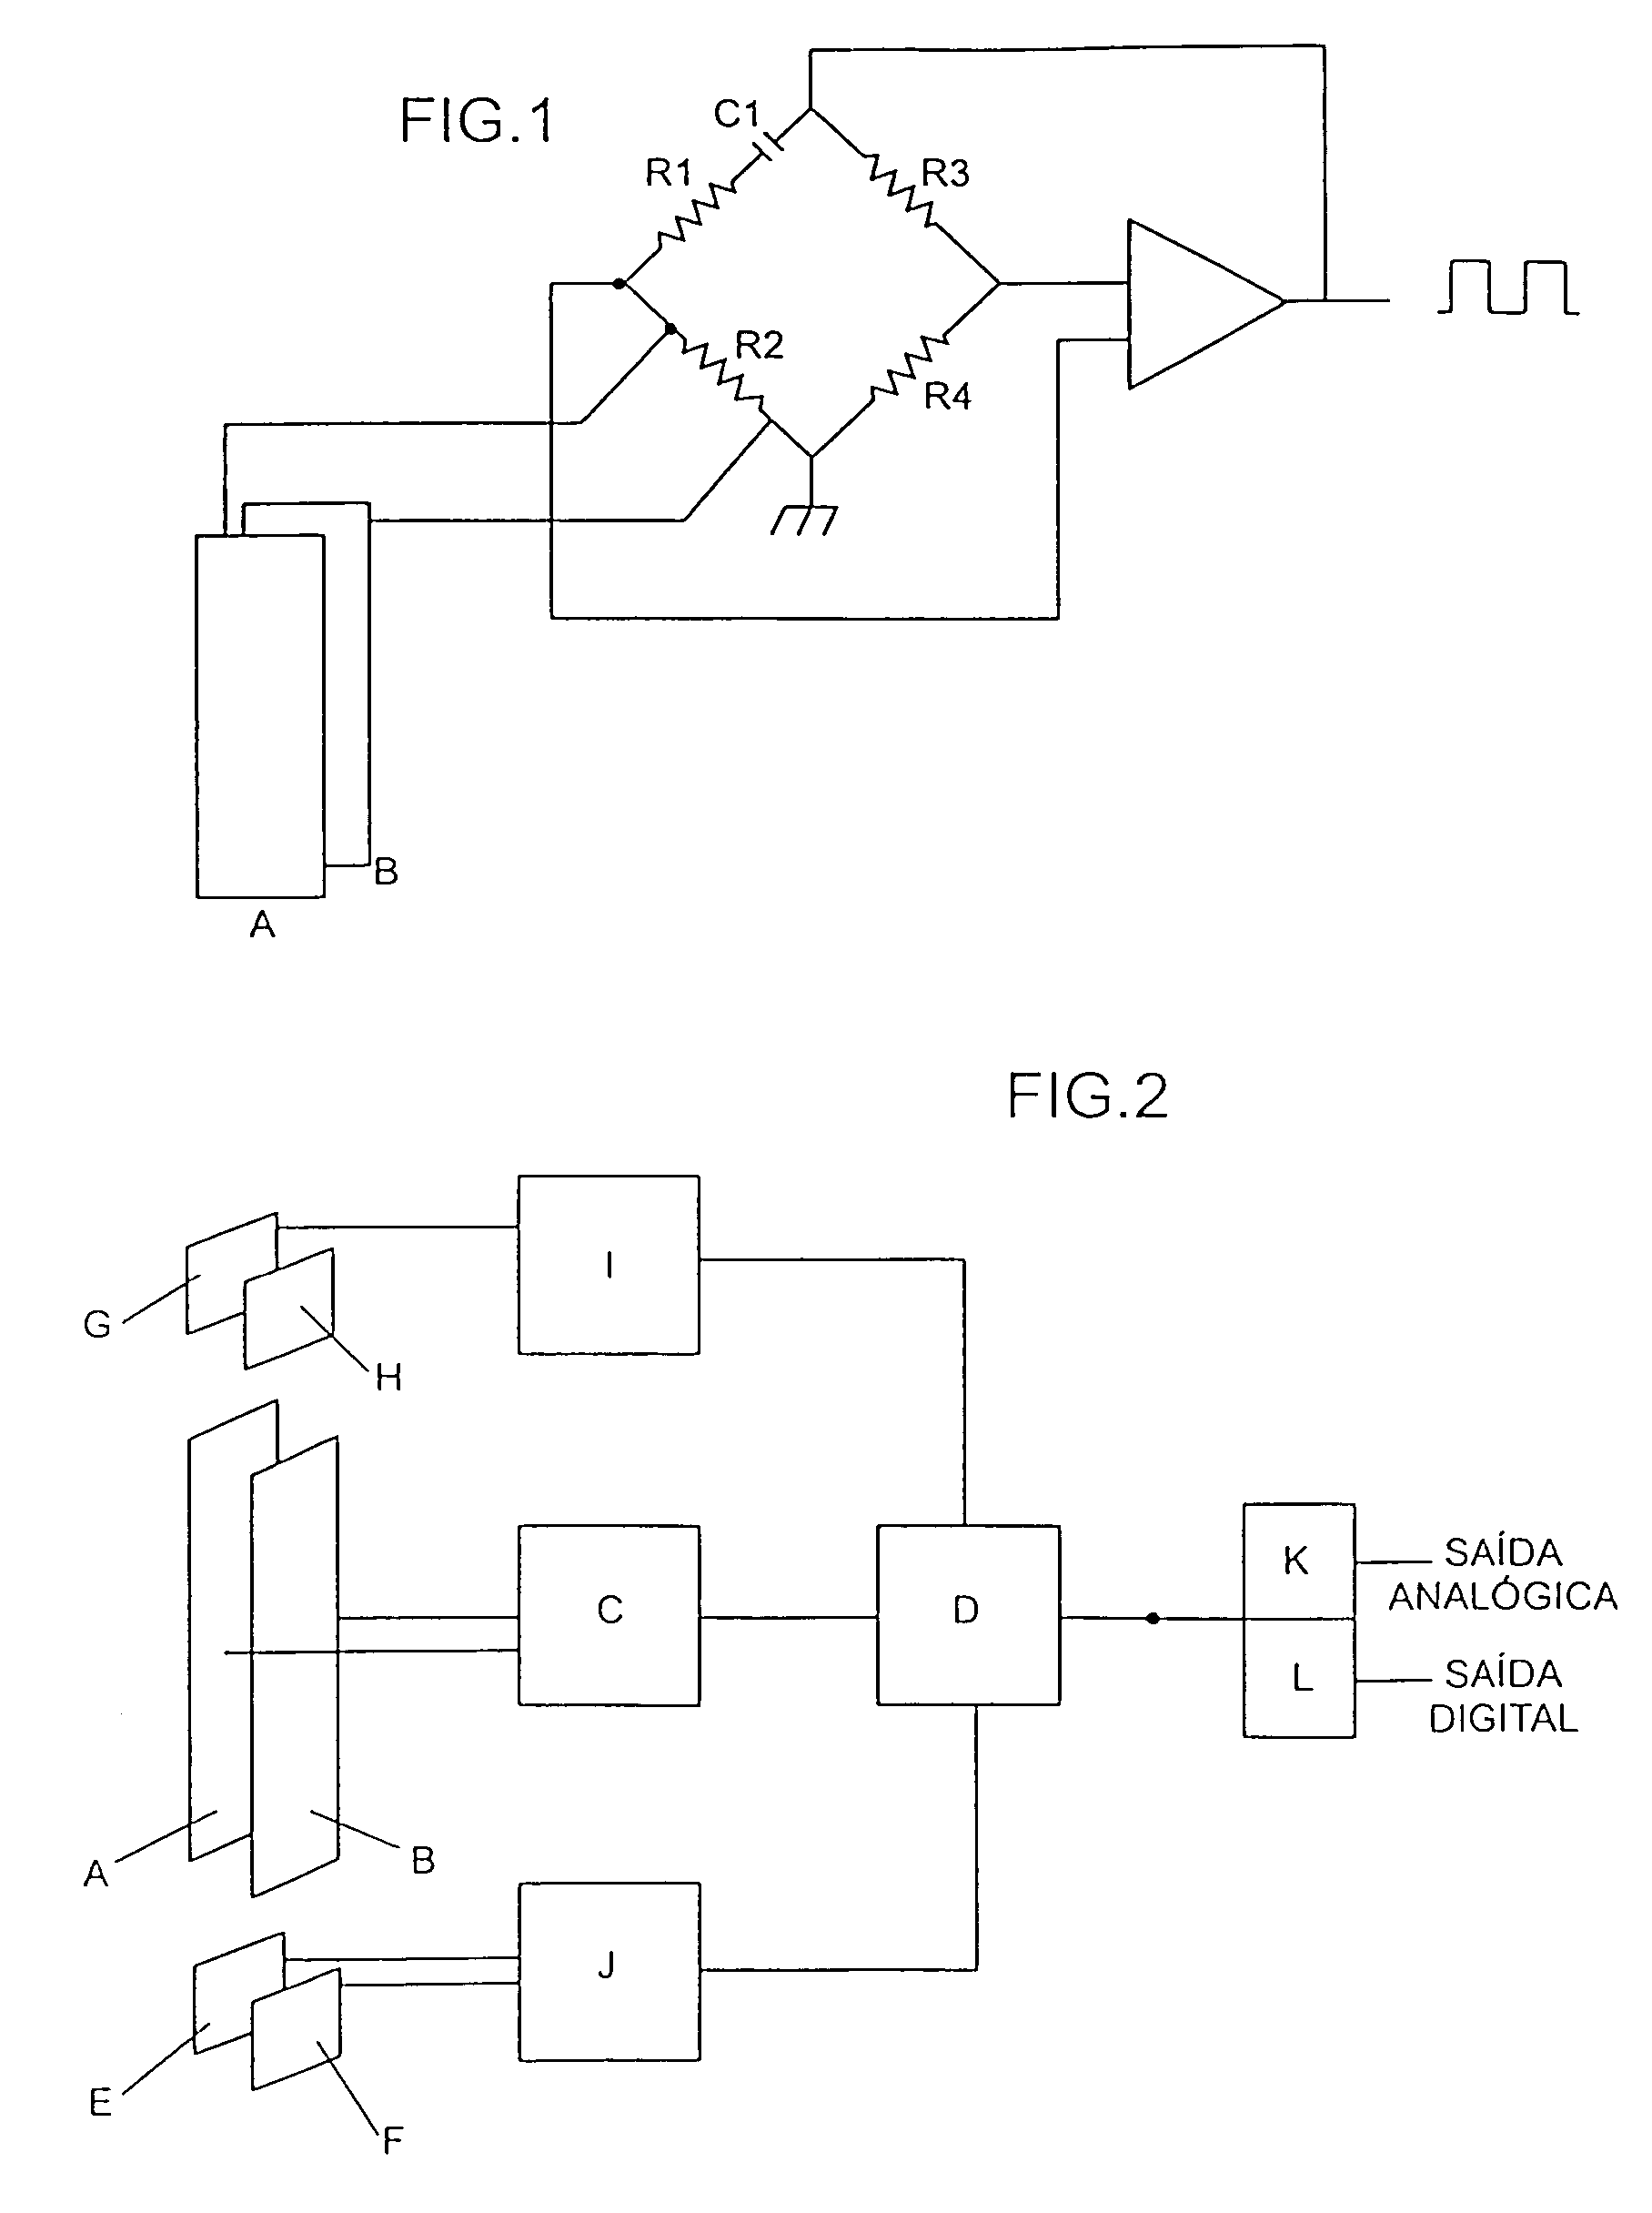 Apparatus for measuring and indicating the level and/or volume of a liquid stored in a container